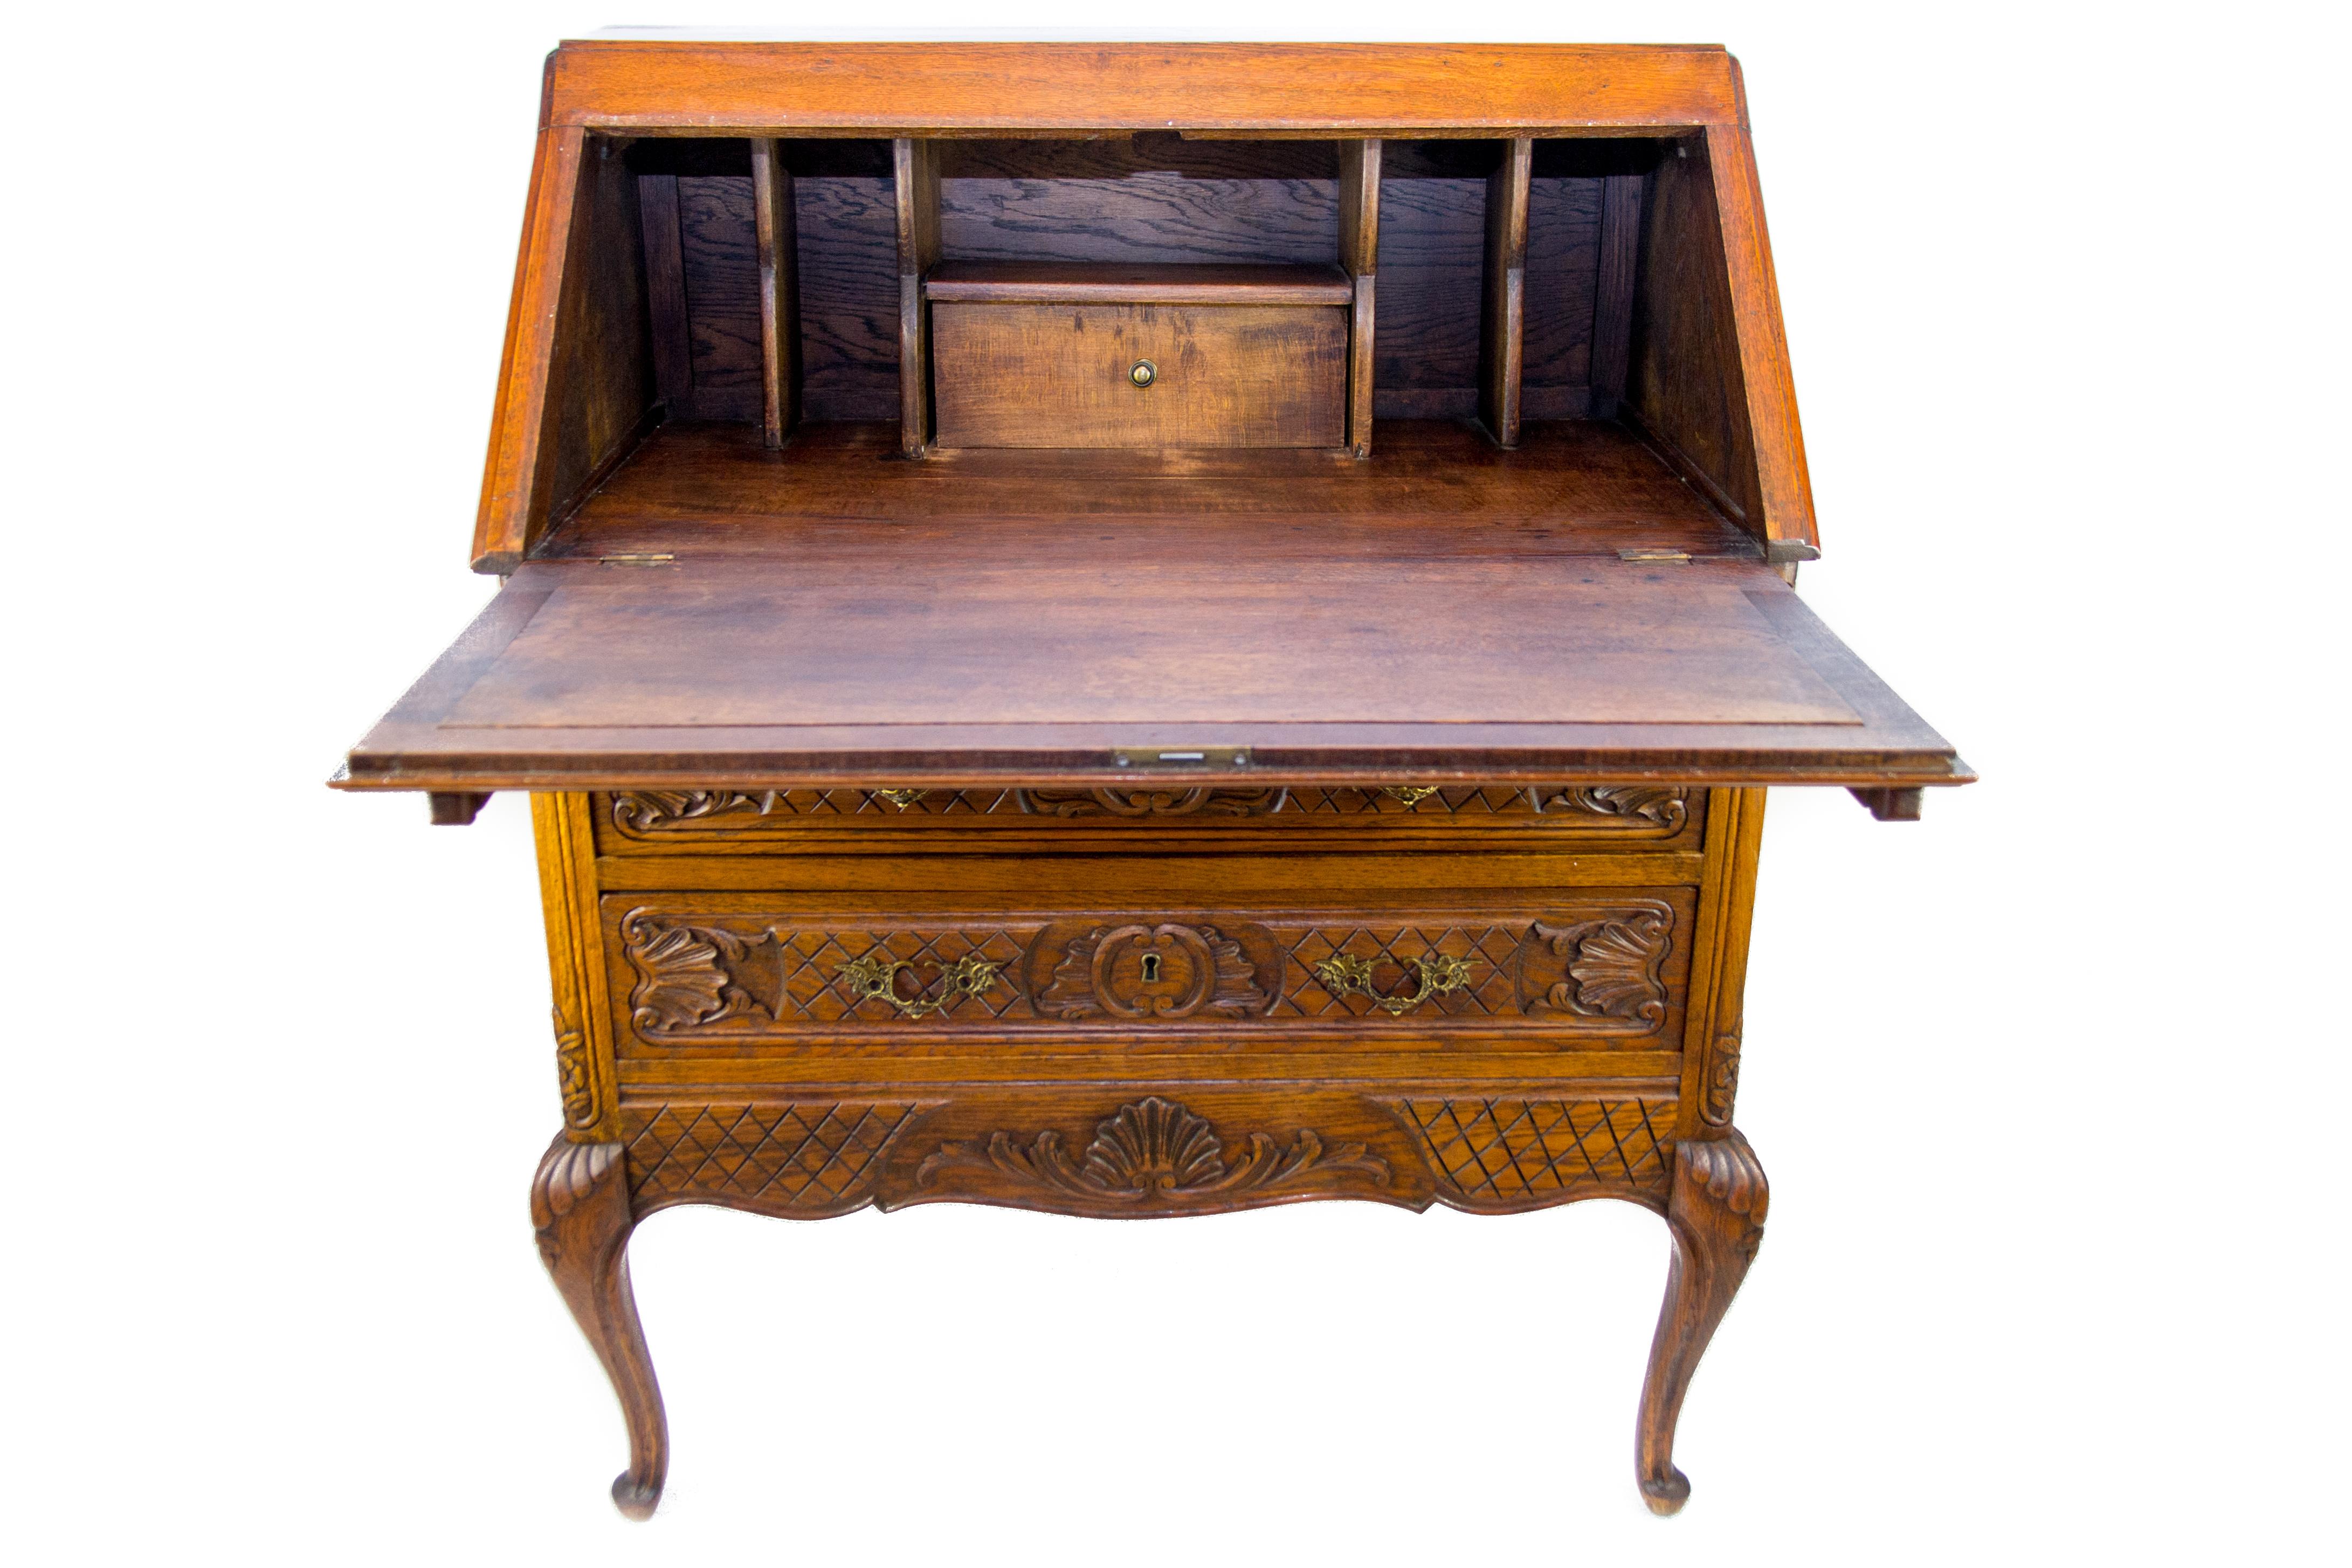 Louis XV Style carved oak drop front secretary or bureau or writing desk, two drawers with shaped bronze handles, made in France in the 1920s.
Opened it reveals a fitted desk interior with one drawer and a large writing area, held by two pullout /